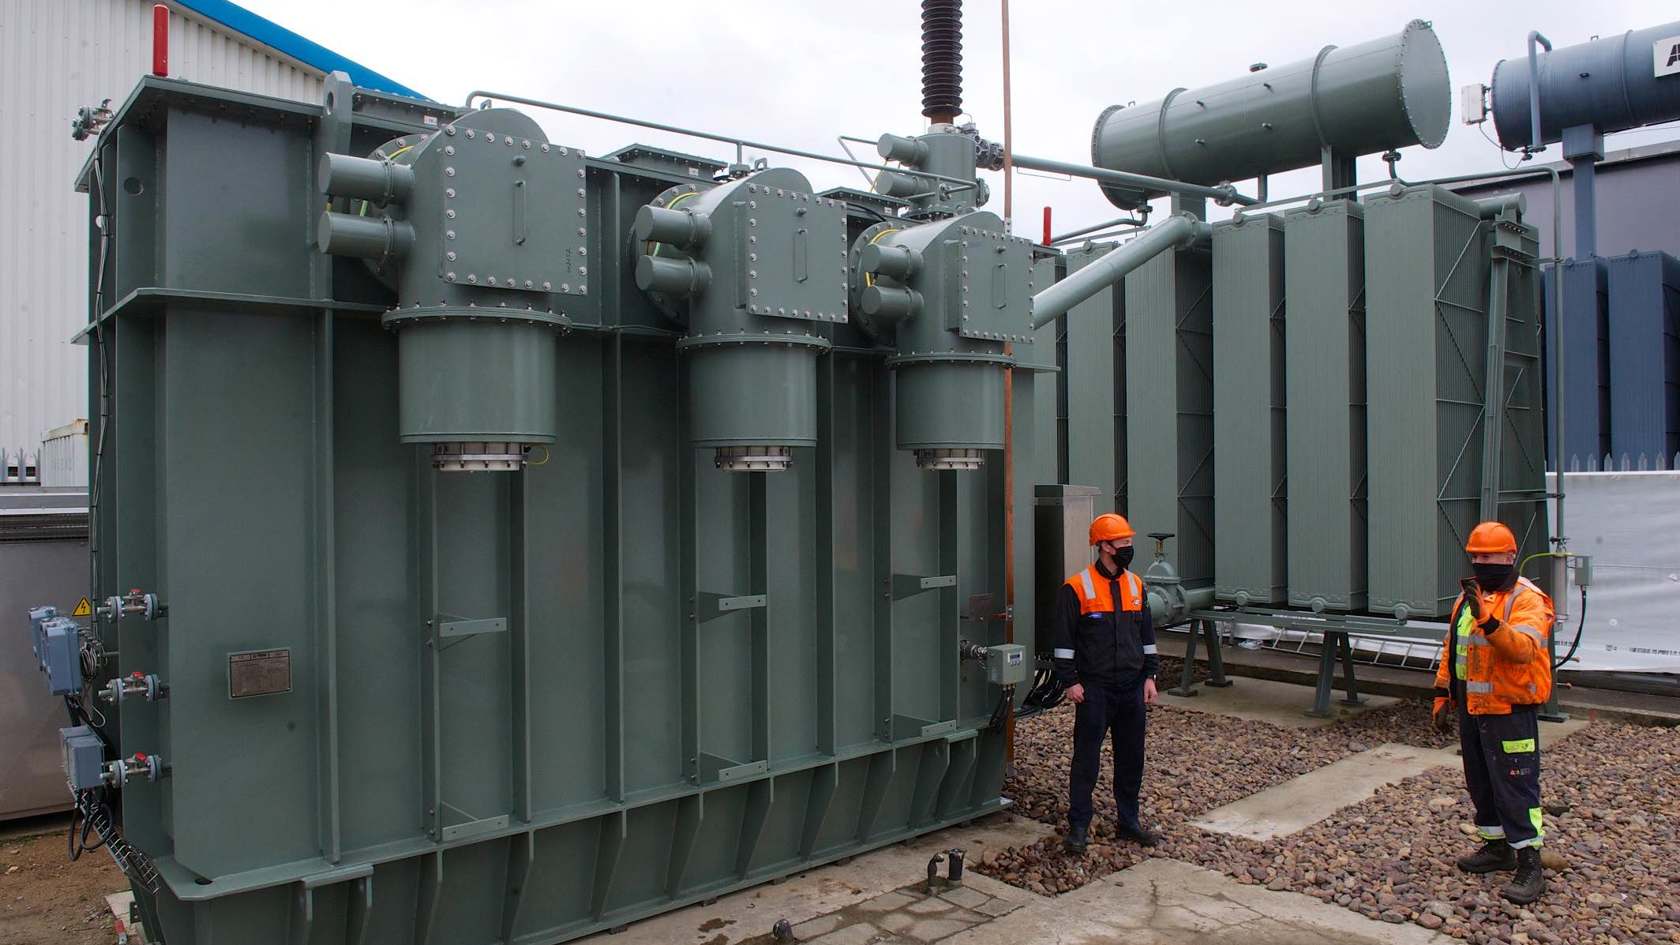 Two workers examine a large electricity transformer